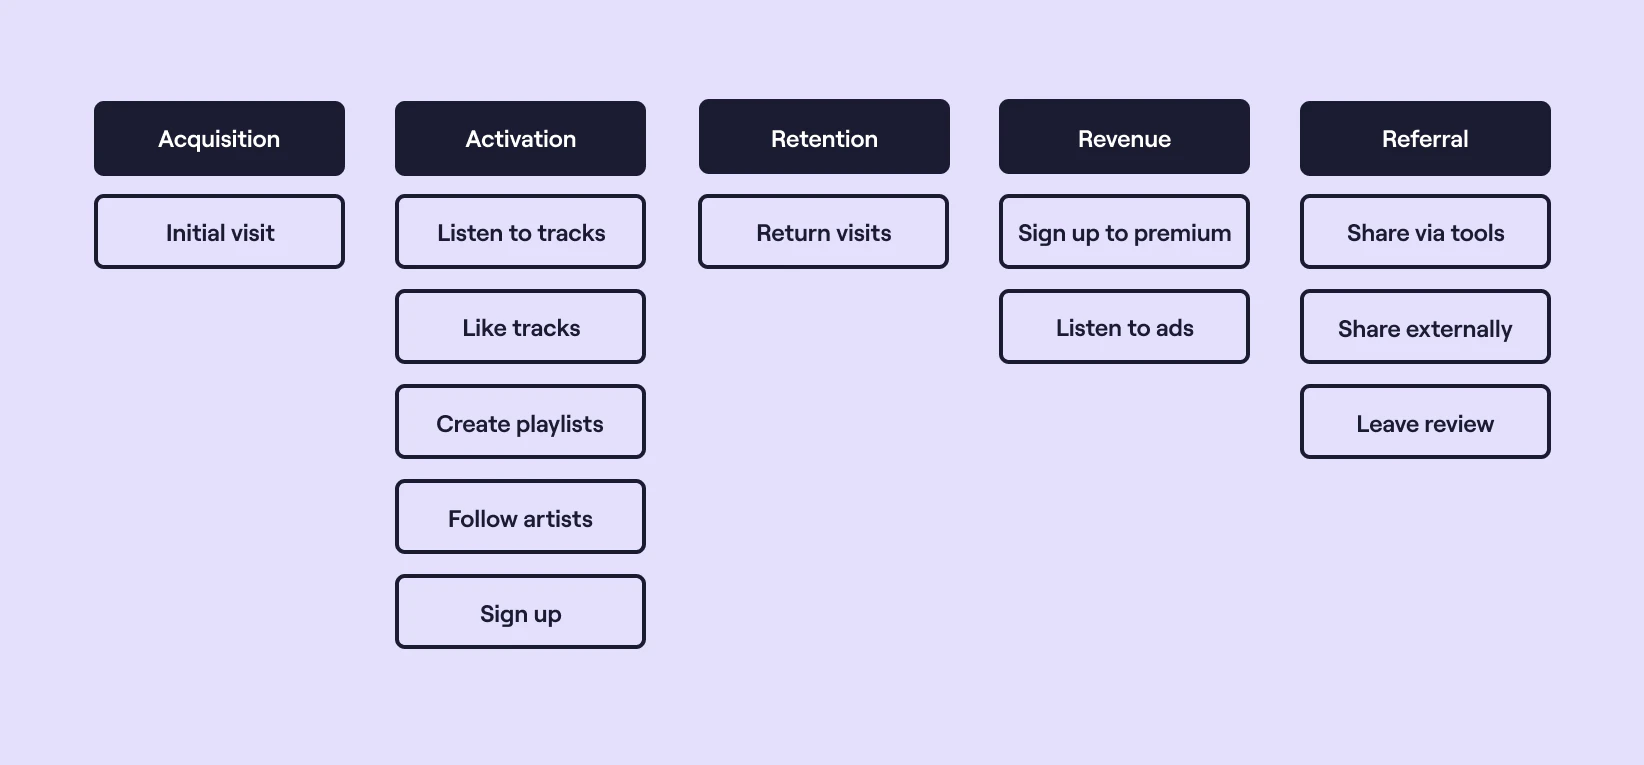 Mapping out pirate metrics for Spotify 1 of 3